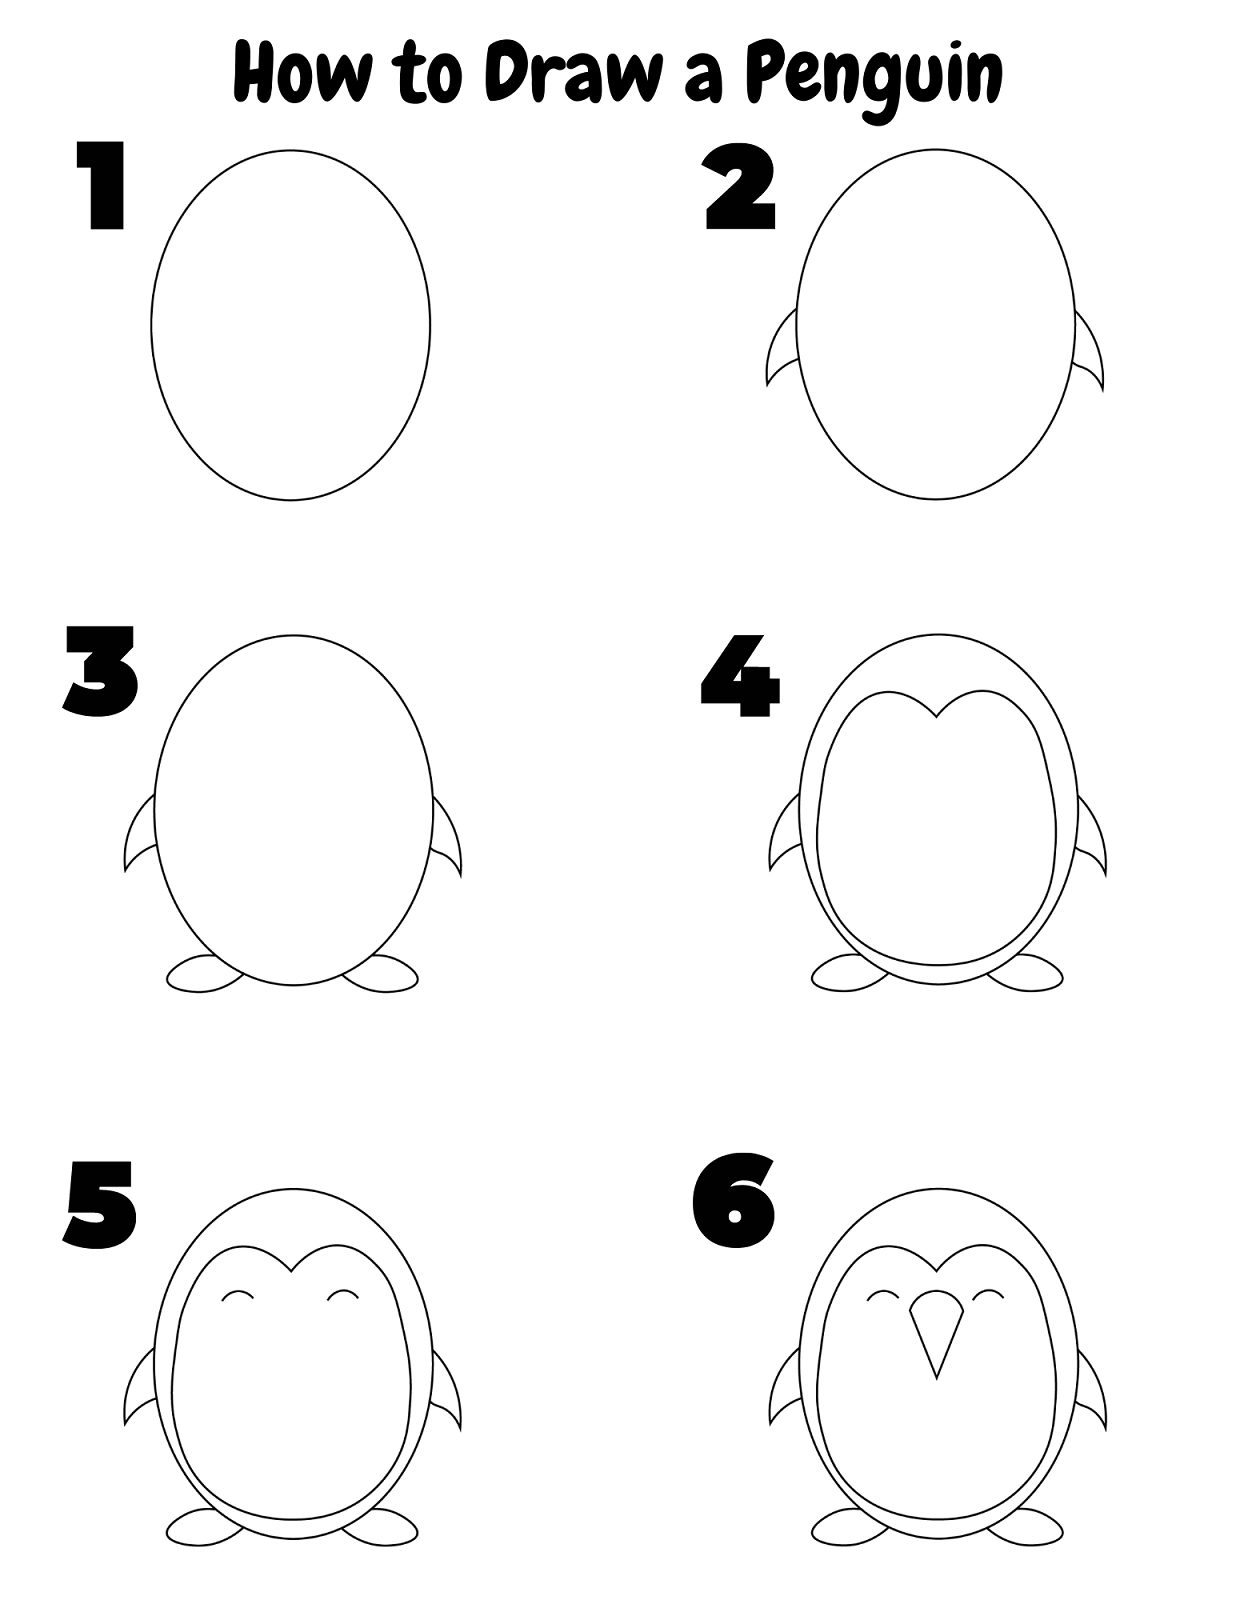 How to Draw a Penguin (Easy for Kids) Crafty Morning